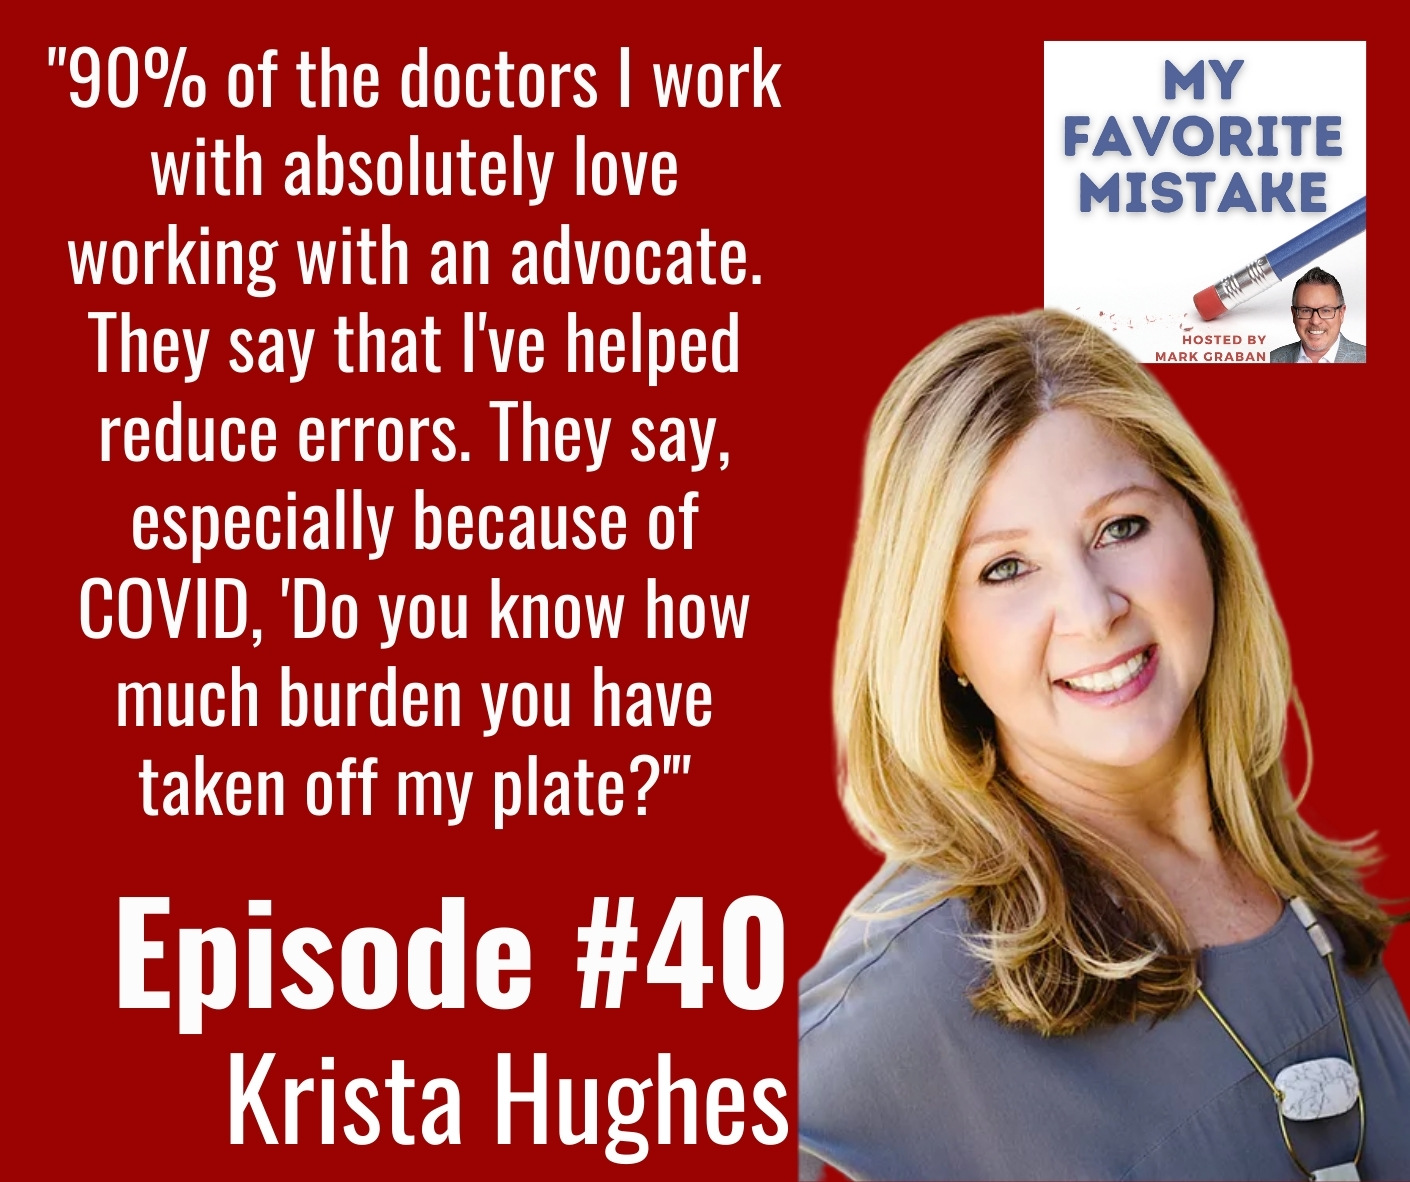 "90% of the doctors I work with absolutely love working with an advocate. They say that I've helped reduce errors. They say, especially because of COVID, 'Do you know how much burden you have taken off my plate?'"